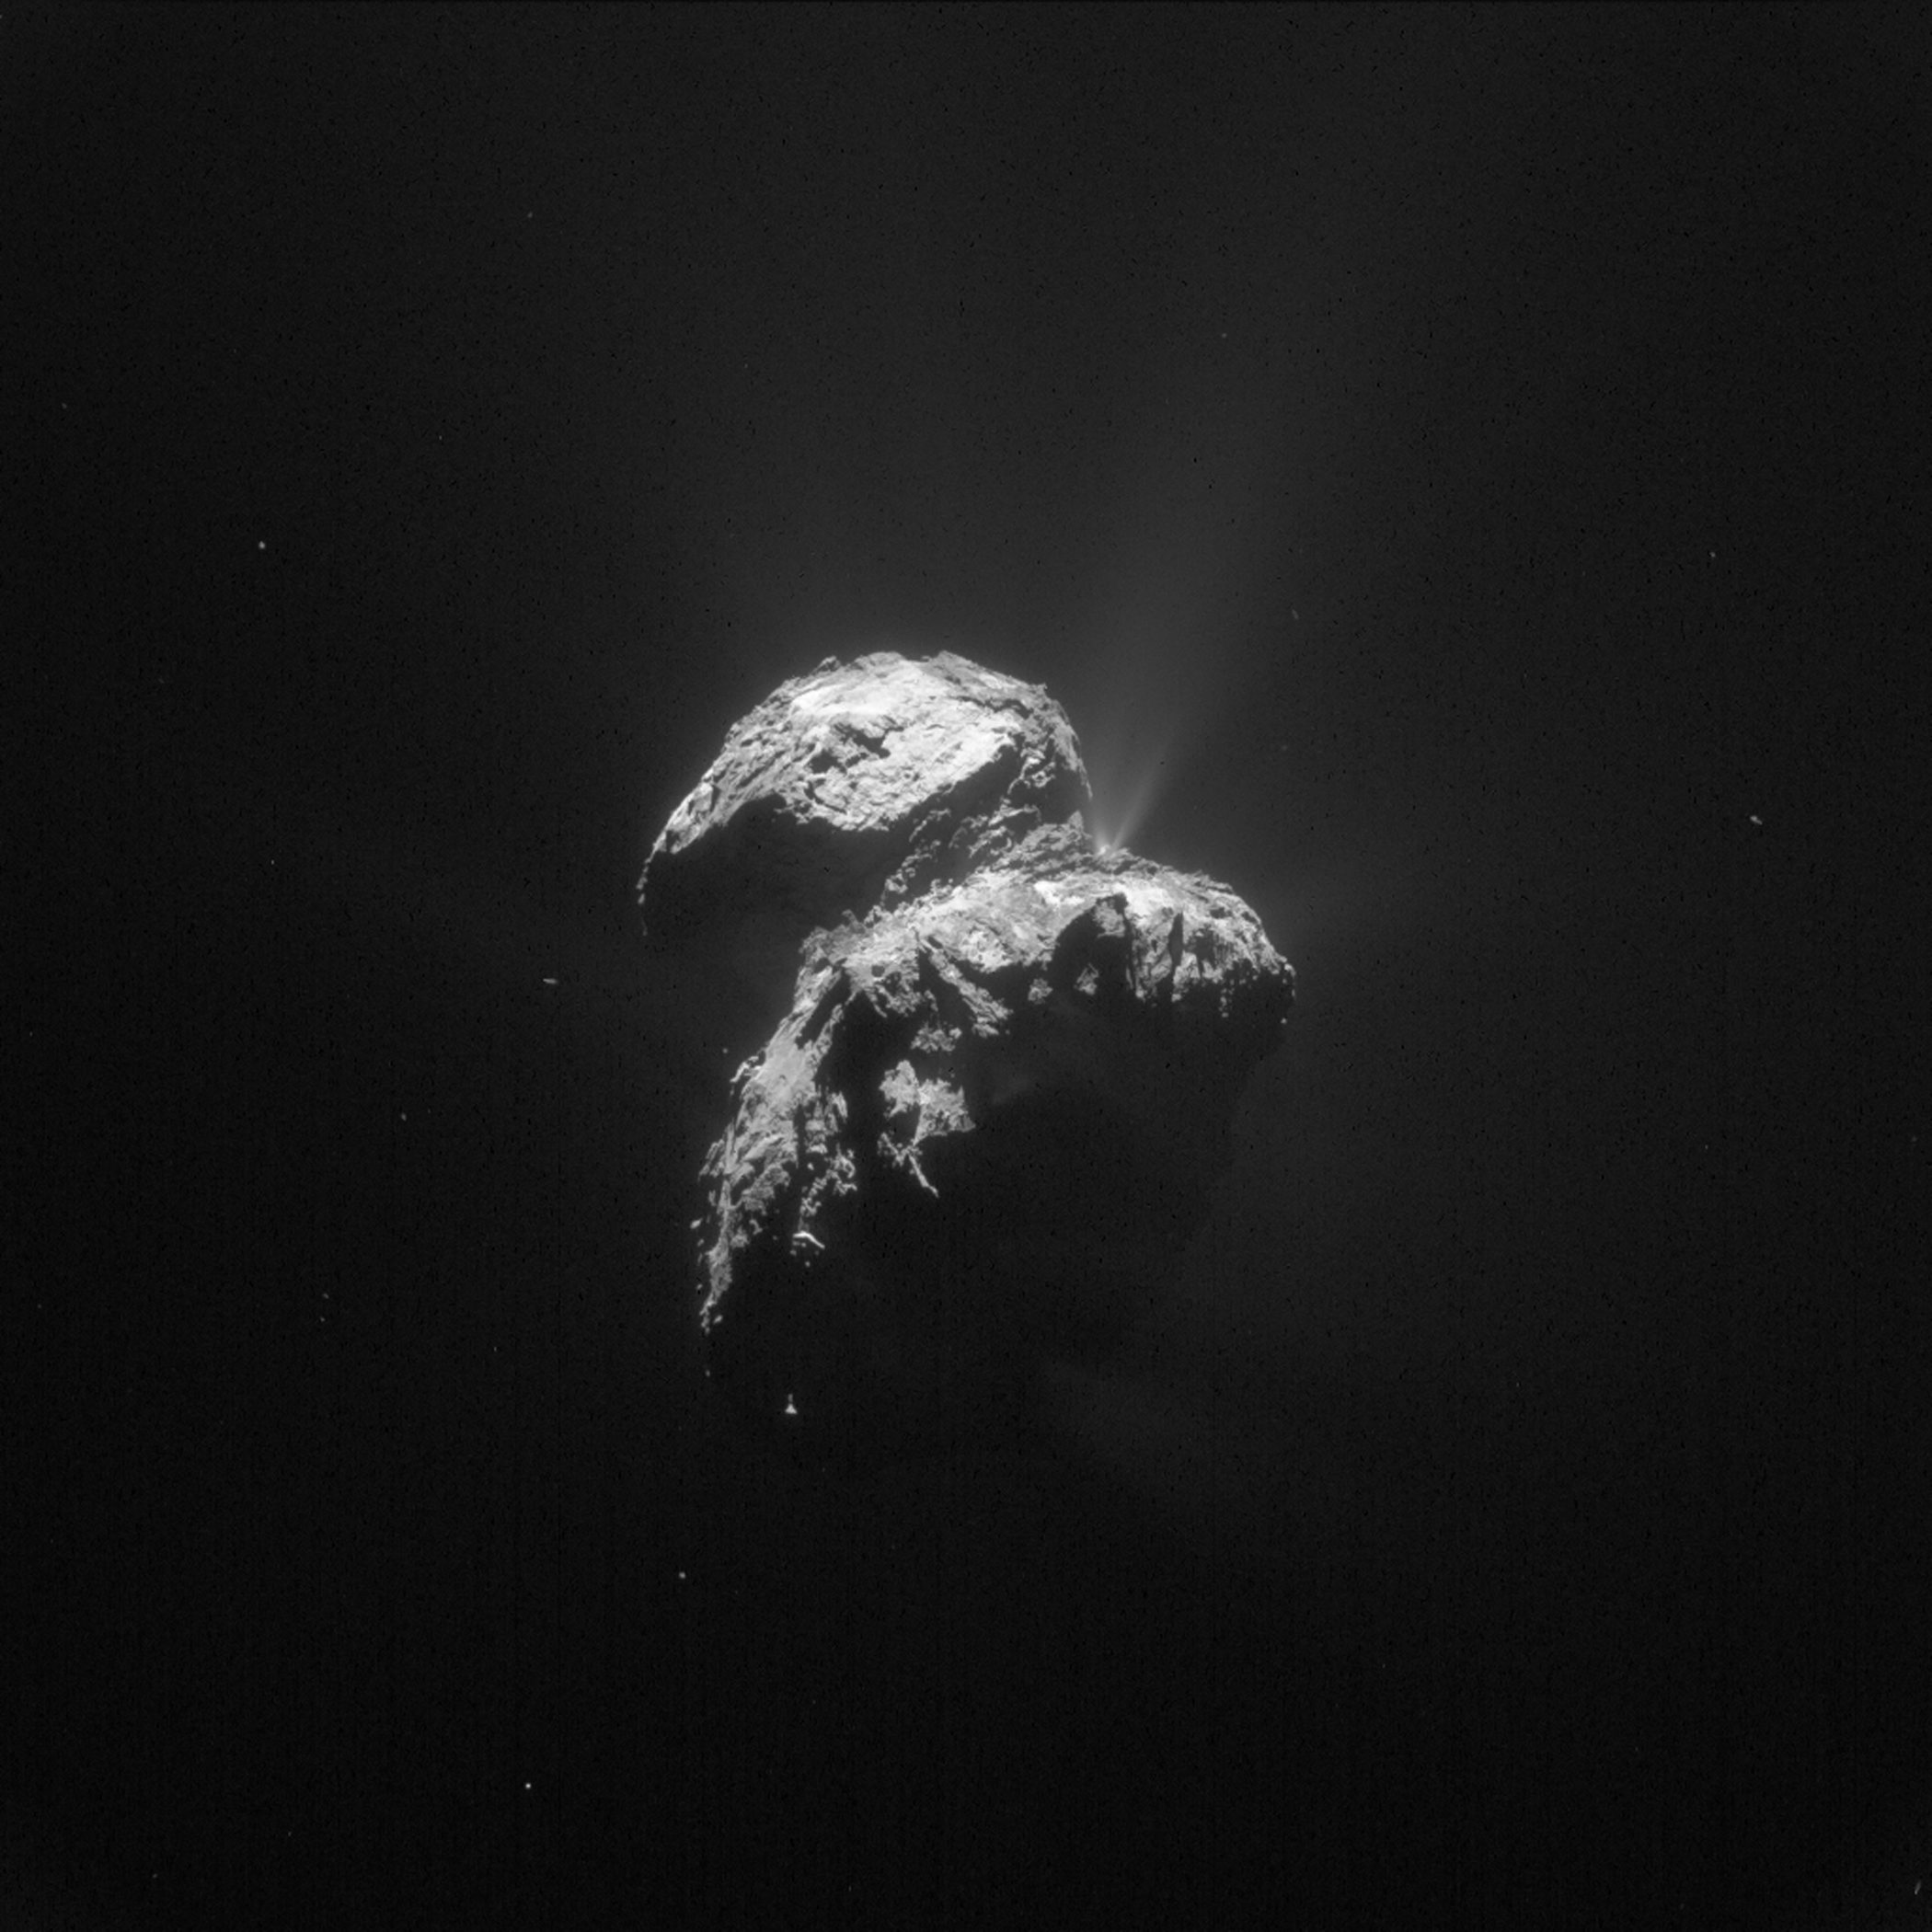 Comet 67P, photographed by the Rosetta Orbiter from a distance of 79 miles on Nov. 22, 2015.